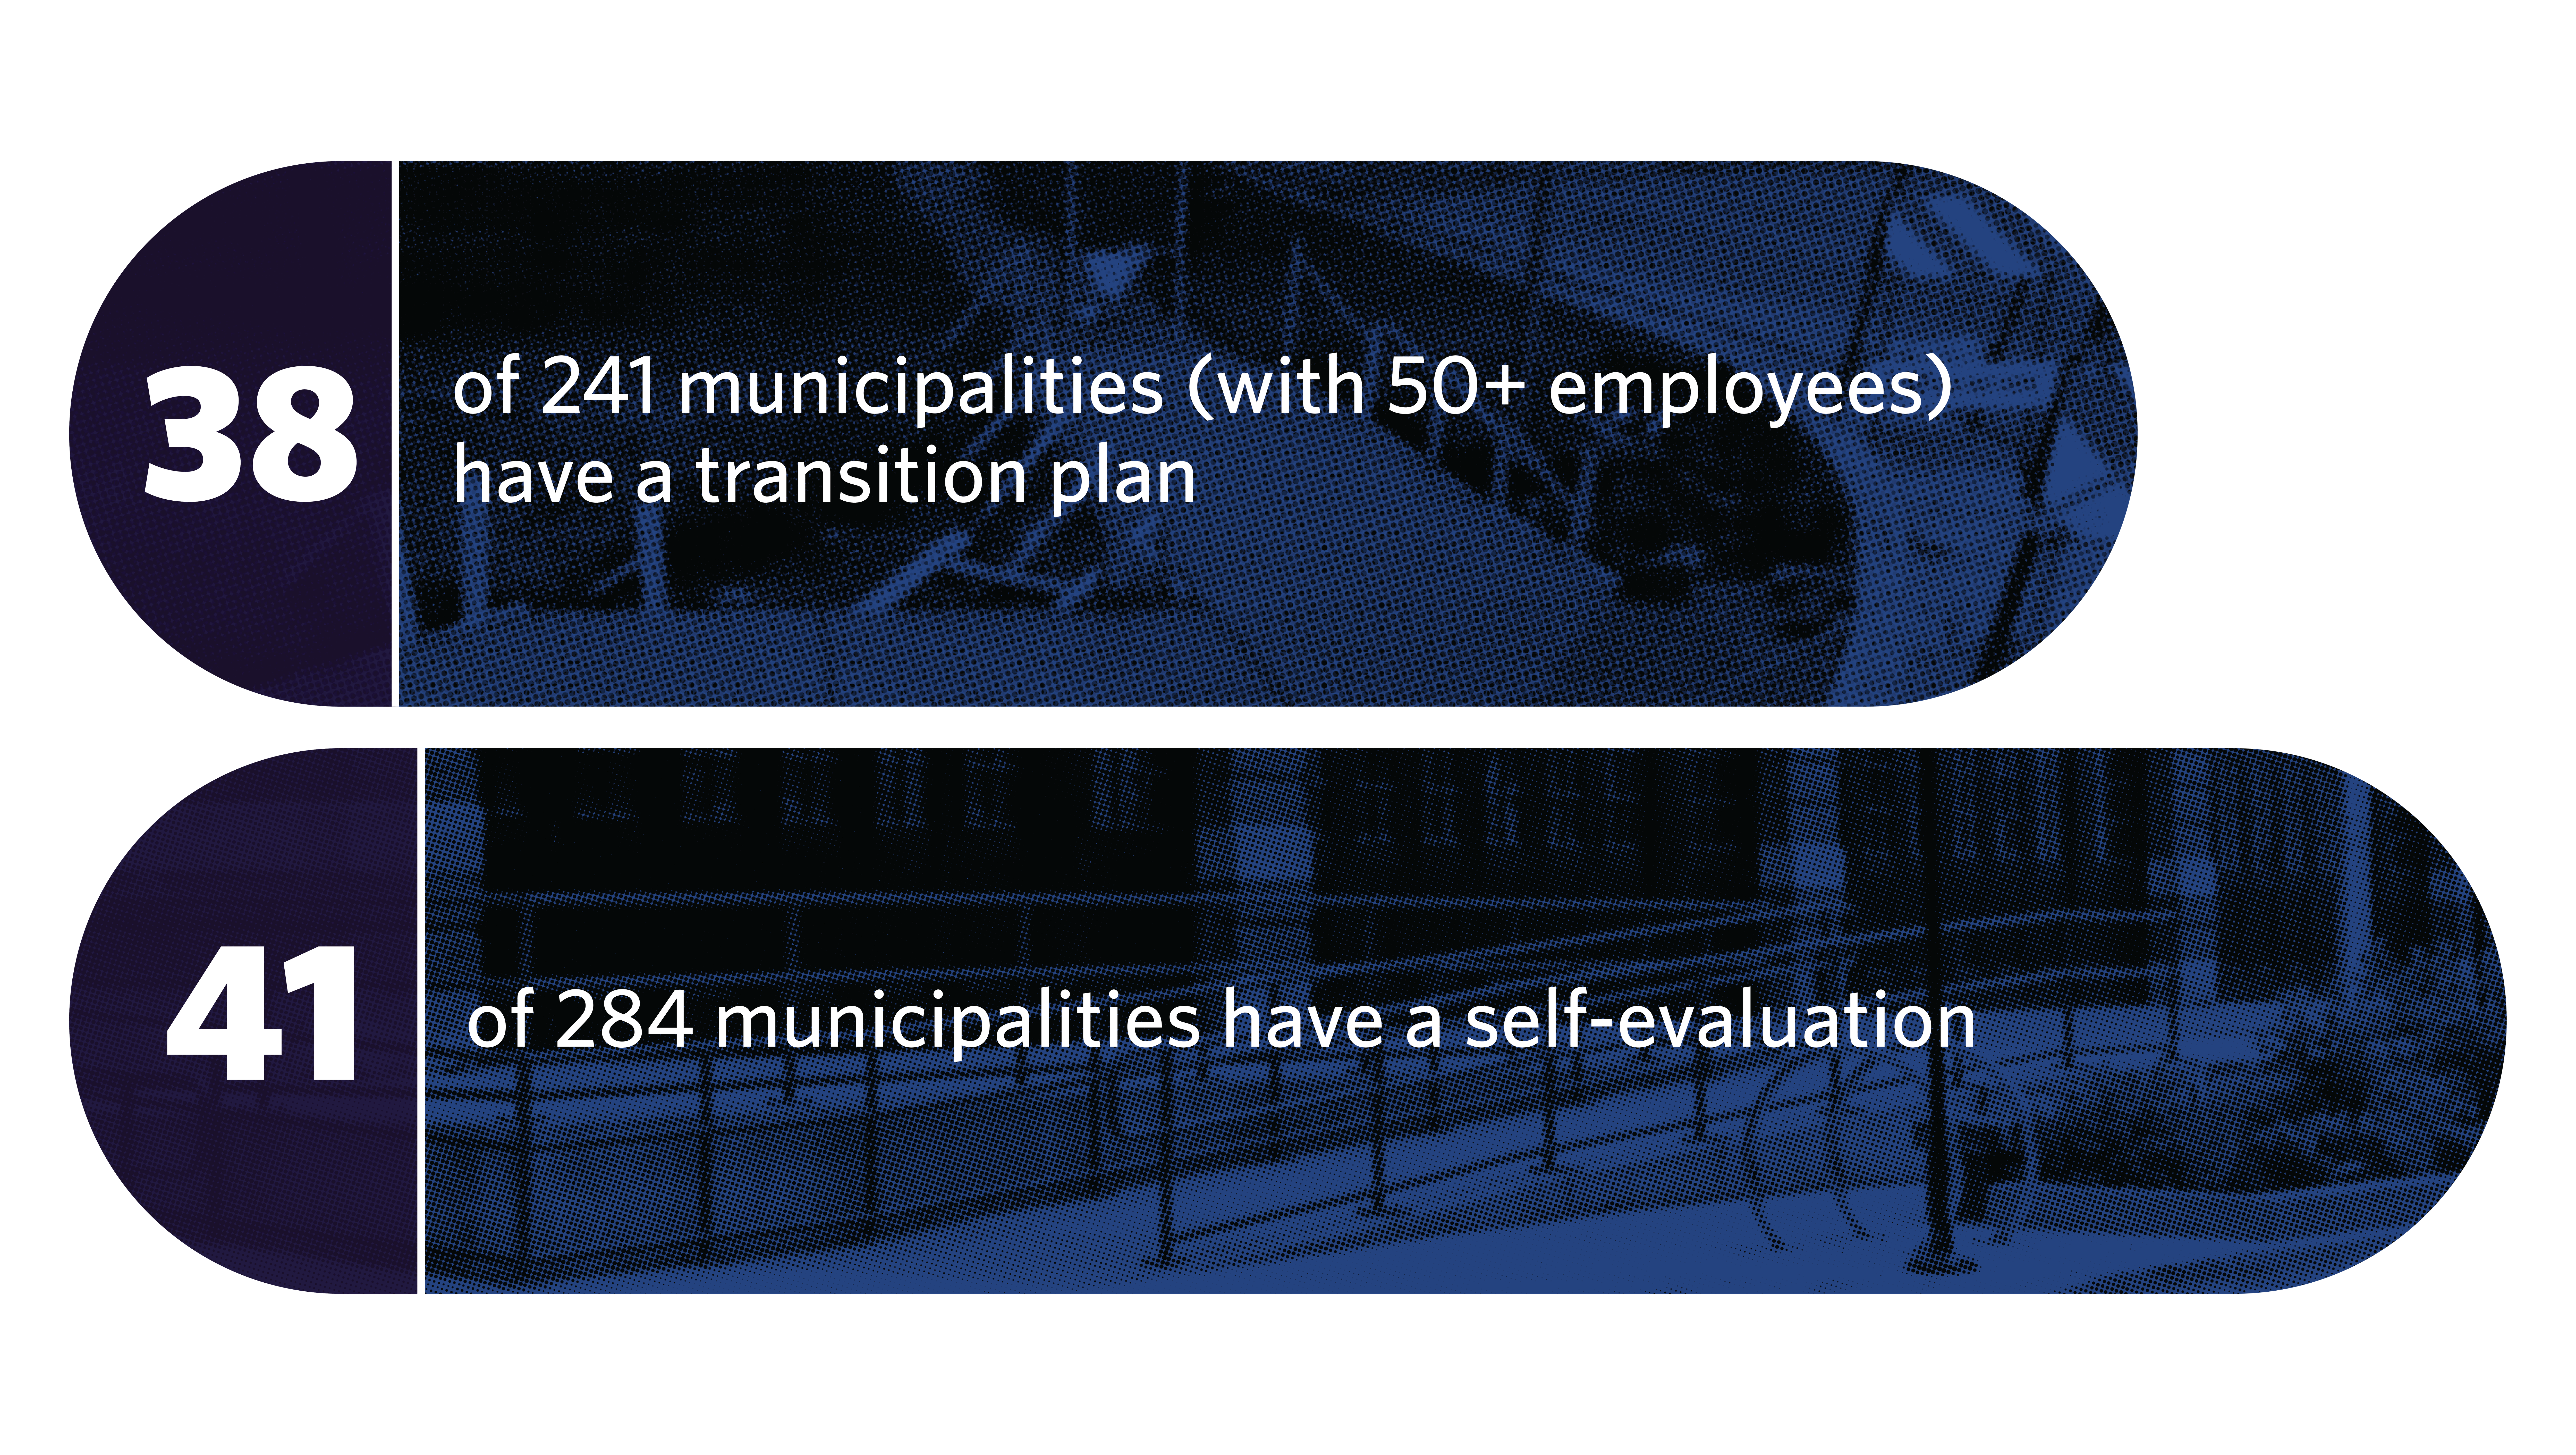 ADA compliance measure infographic. Top meter reads: 38 of 241 municipalities (with 50+ employees) have a transition plan. Bottom meter reads: 41 of 284 municipalities have a self-evaluation